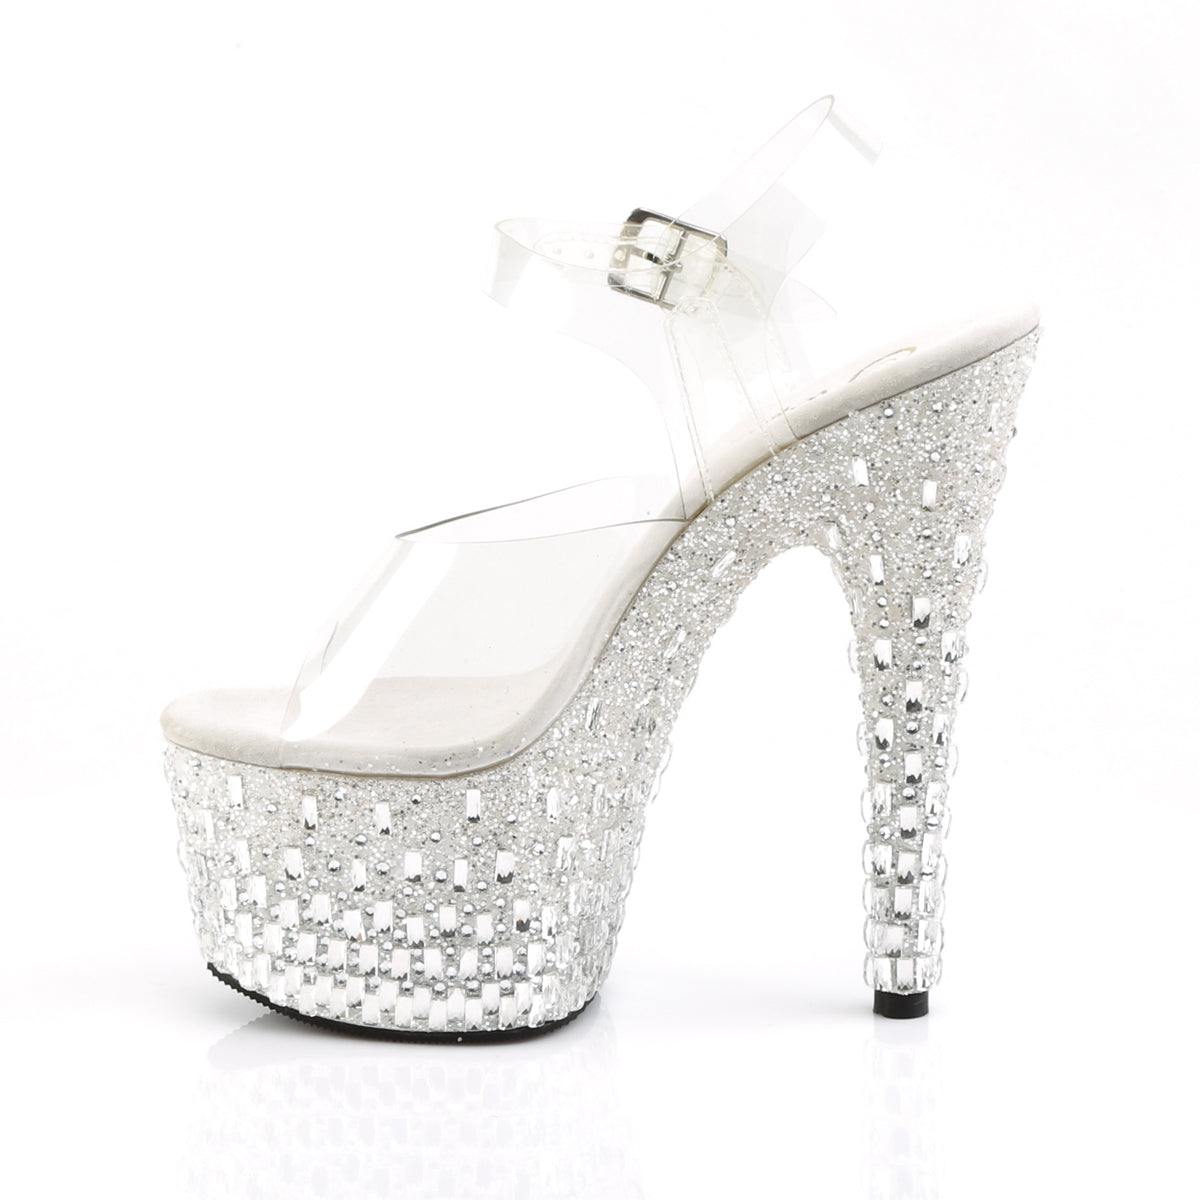 ADORE-708MR-5 7" Heel Clear and White Exotic Dancing Shoes-Pleaser- Sexy Shoes Pole Dance Heels